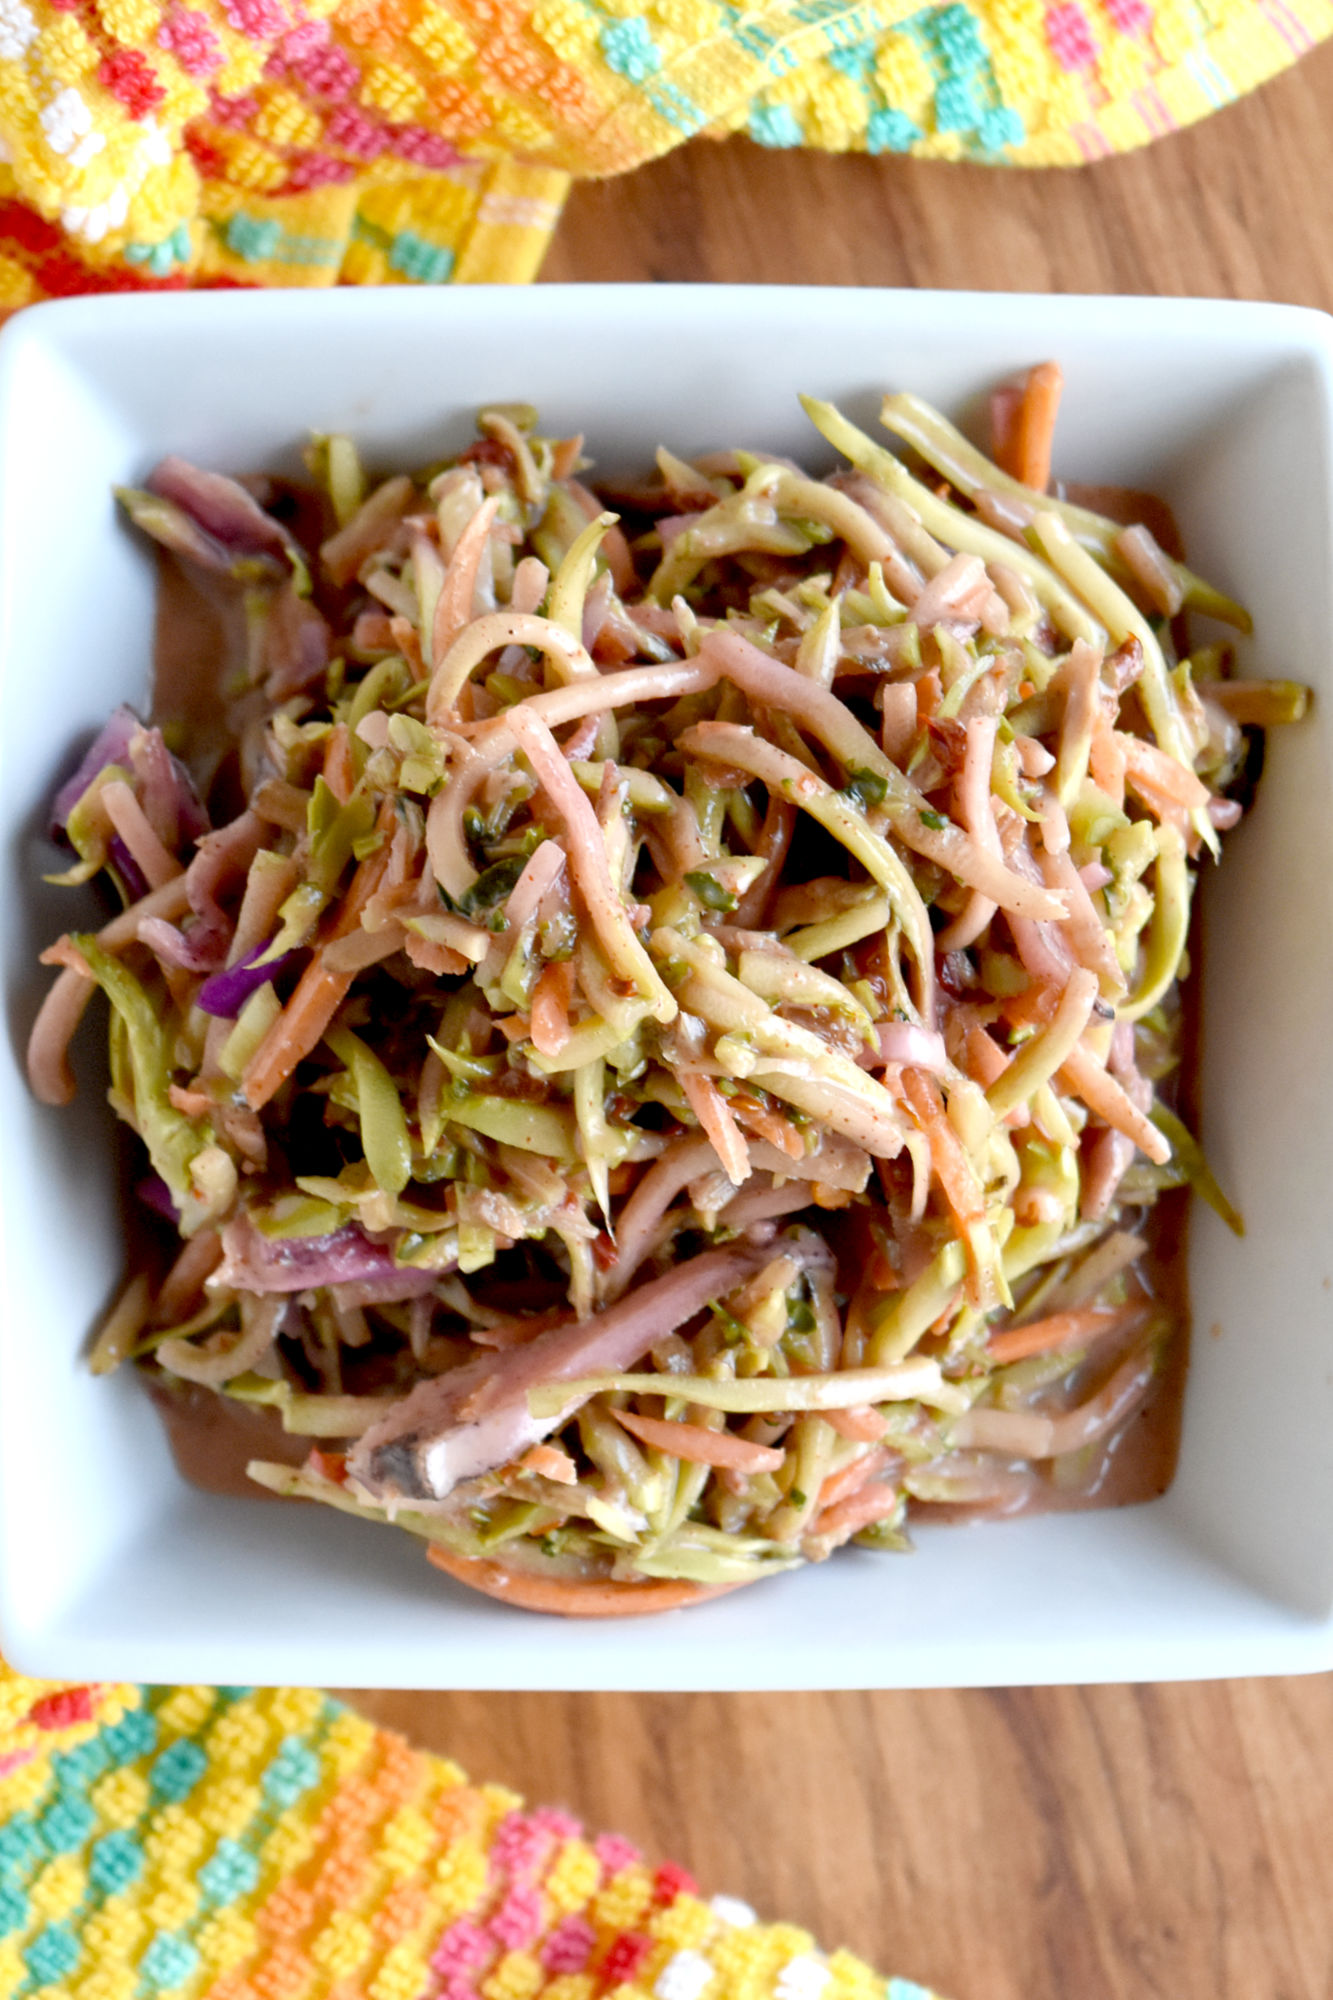 Chipotle Broccoli Slaw is super crunchy, packed with vegetables, and kick up with chipotle. It’s sweet and sour an oh so spicy! #BBQWeek #broccolislaw #chipotleslaw #coleslawrecipe
